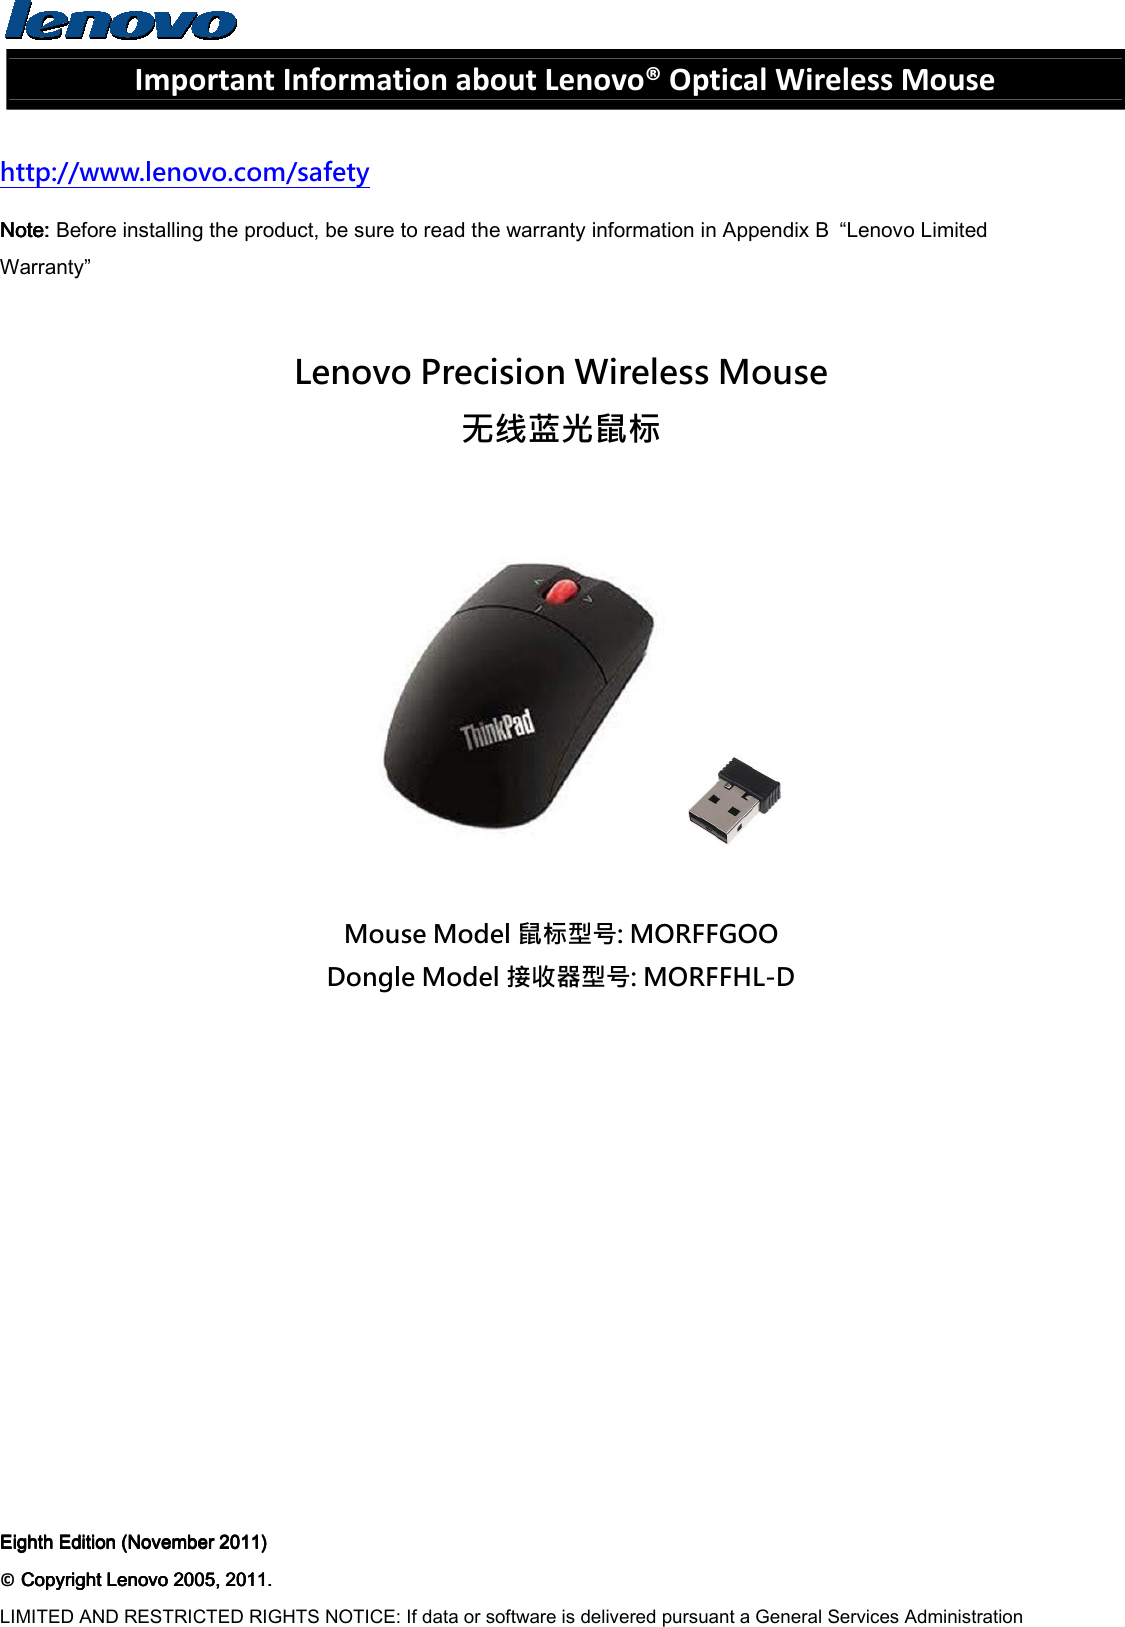  Important Information about Lenovo® Optical Wireless Mouse  http://www.lenovo.com/safety Note: Note: Note: Note: Before installing the product, be sure to read the warranty information in Appendix B  “Lenovo Limited Warranty”  Lenovo Precision Wireless Mouse 无线蓝光鼠标    Mouse Model 鼠标型号: MORFFGOO Dongle Model 接收器型号: MORFFHL-D        Eighth Edition (November 2011)Eighth Edition (November 2011)Eighth Edition (November 2011)Eighth Edition (November 2011)    ©    Copyright Lenovo 2005, 2011.Copyright Lenovo 2005, 2011.Copyright Lenovo 2005, 2011.Copyright Lenovo 2005, 2011.    LIMITED AND RESTRICTED RIGHTS NOTICE: If data or software is delivered pursuant a General Services Administration 